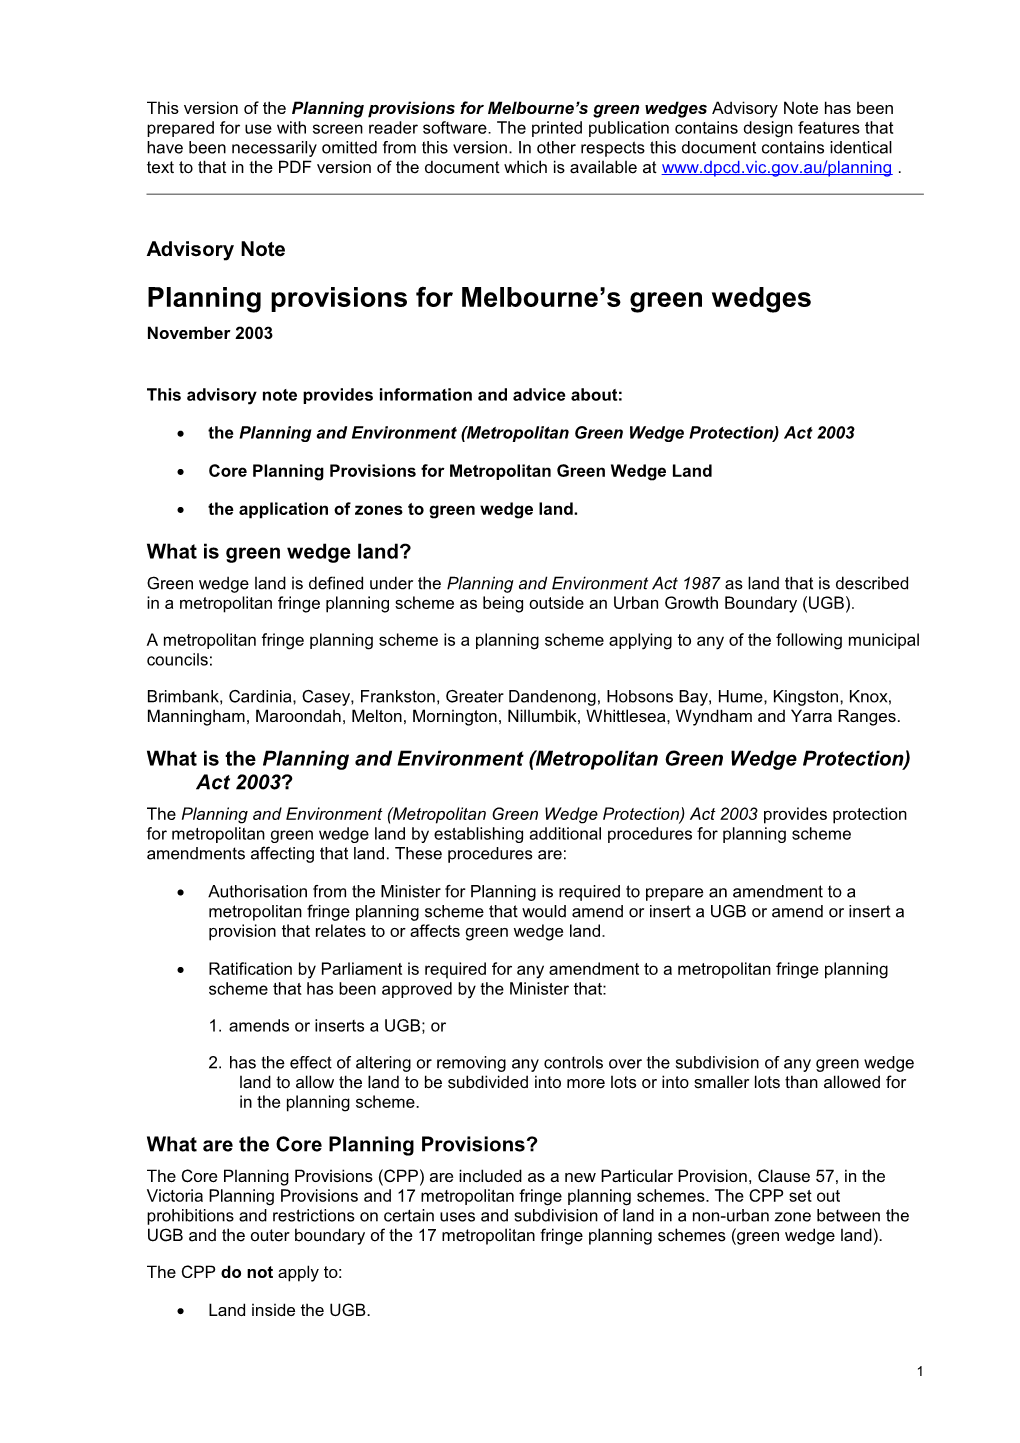 Planning Provisions for Melbourne's Green Wedges